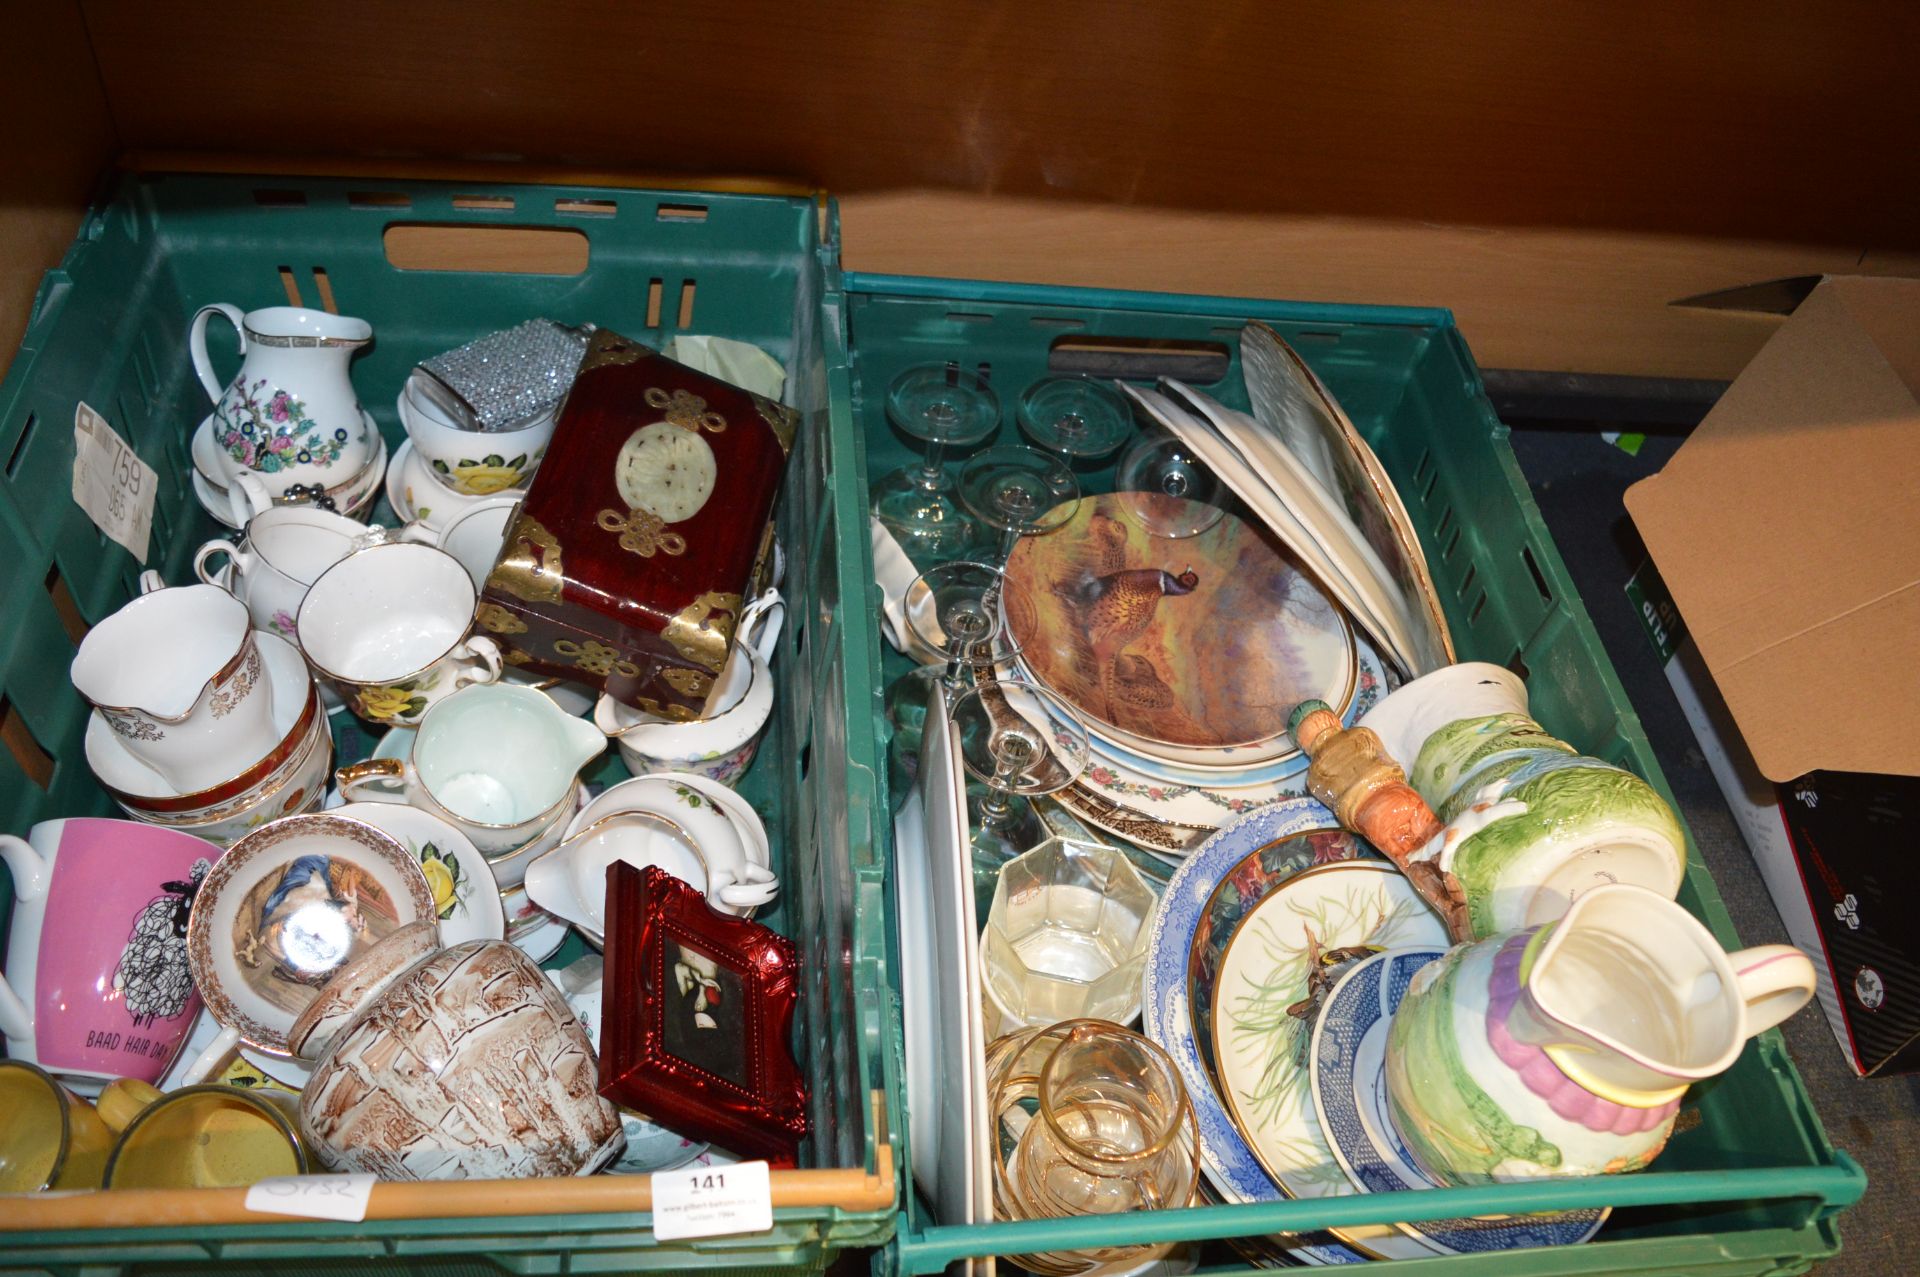 *Pottery and Glassware Including Assorted Tea Ware, Decorative Plates, etc.